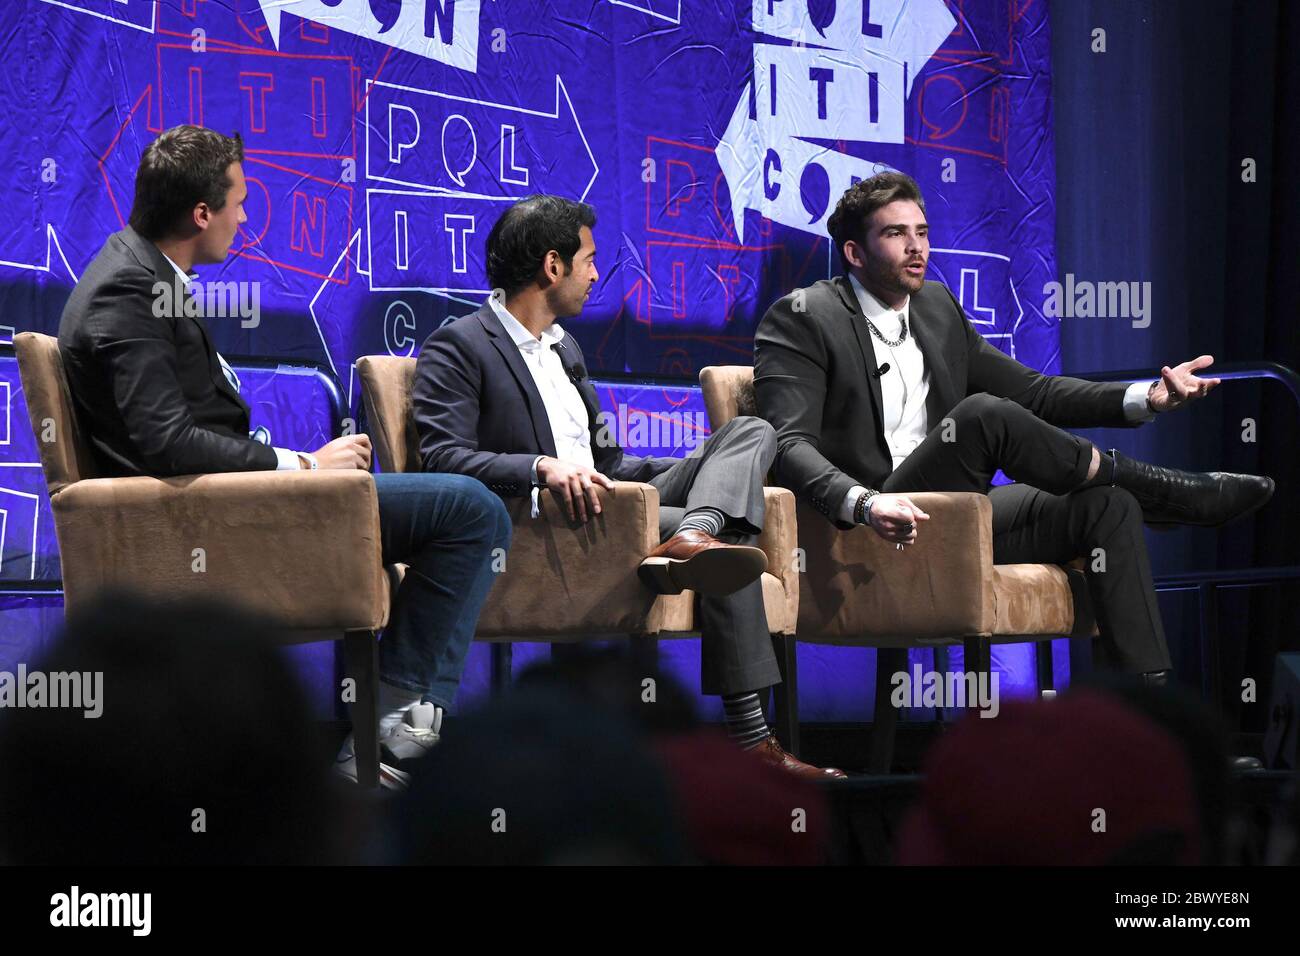 October 20, 2018, Los Angeles, California, USA: Charlie Kirk, Steven Olikara and Hasan Piker speak onstage at Politicon 2018 at the LA convention Center on October 20, 2018 in Los Angeles, California. (Credit Image: © Billy Bennight/ZUMA Wire) Stock Photo